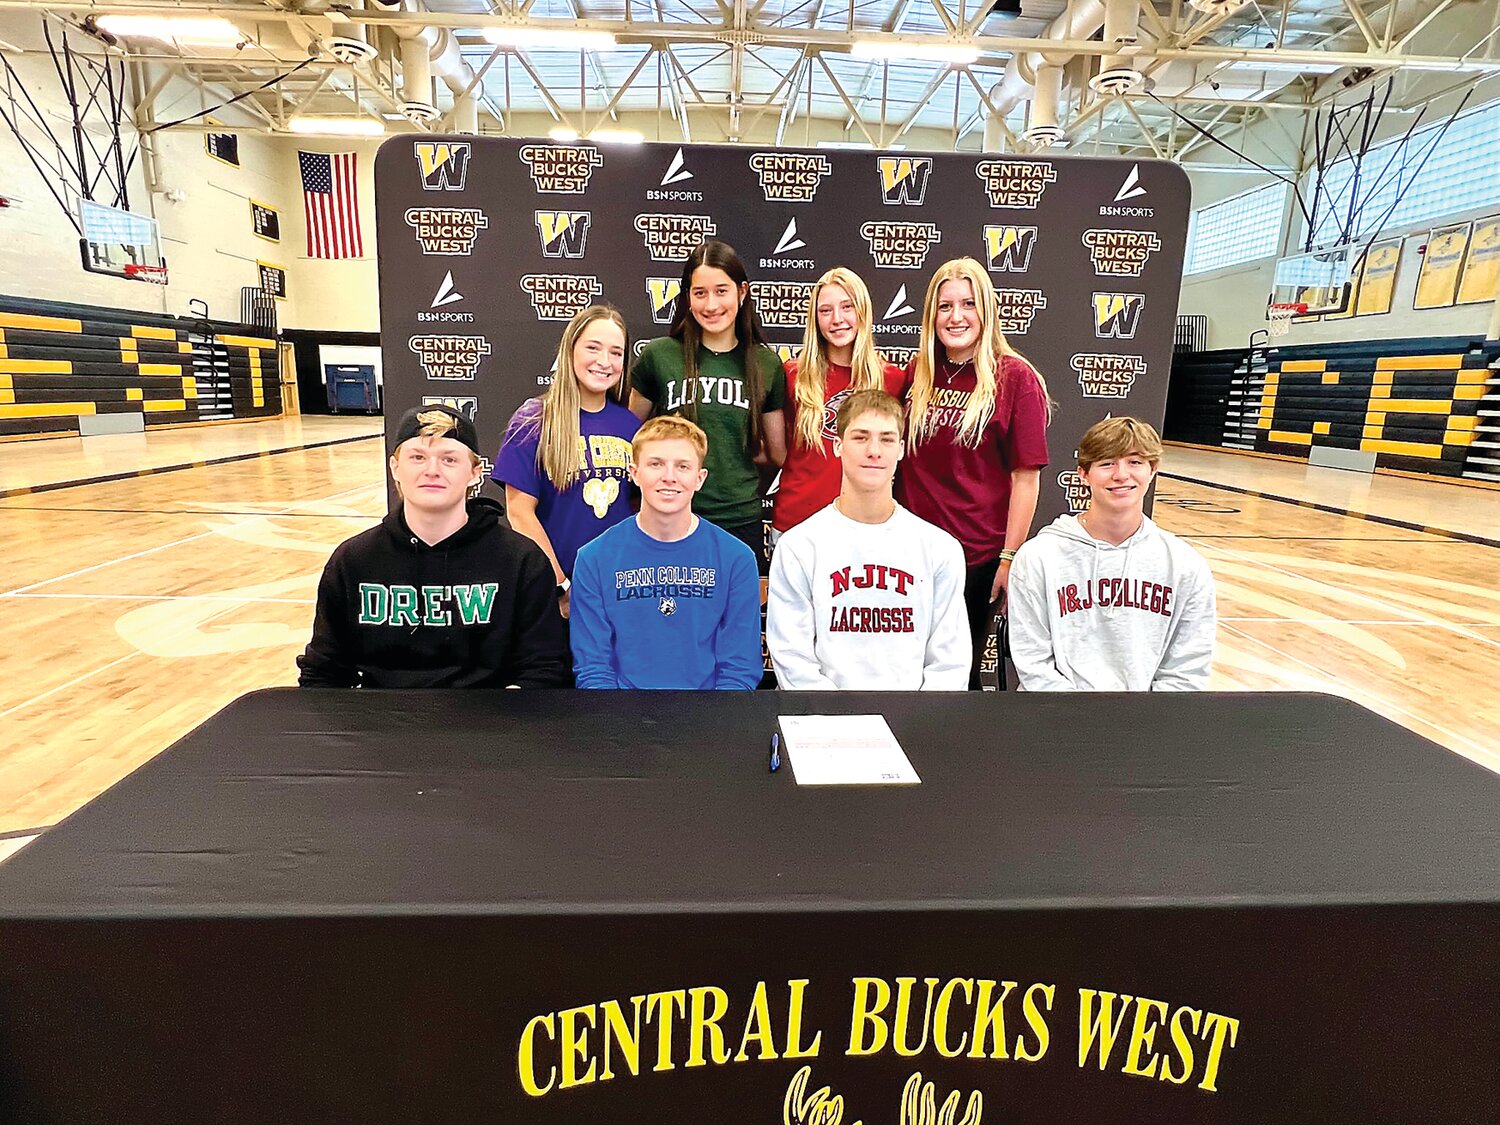 Central Bucks West recently recognized eight seniors for their commitment to compete in collegiate sports. From left are: Will Shandlay, Billy Trimbur, Austin Hahn, Cole Young; back row, Camrynn Pellegrini, Claire Dalsass, Maile McFadden and Sarah Miller.